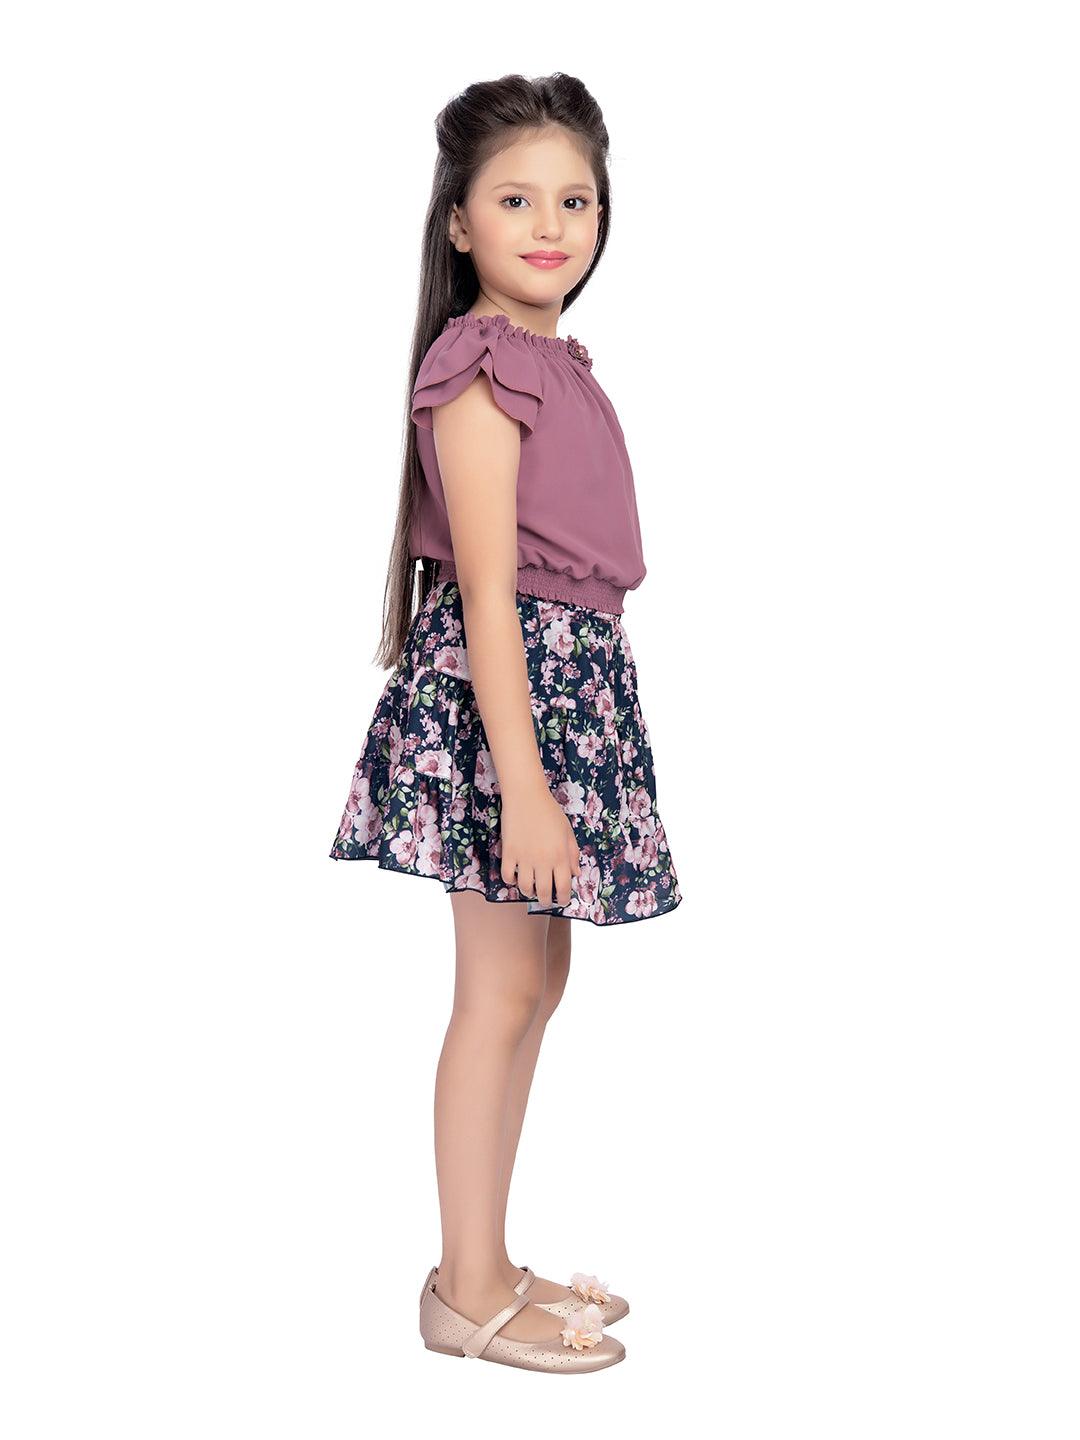 Lovender Colored Skirt Top set - 2074 Lovender - TINY BABY INDIA shop.tinybaby.in